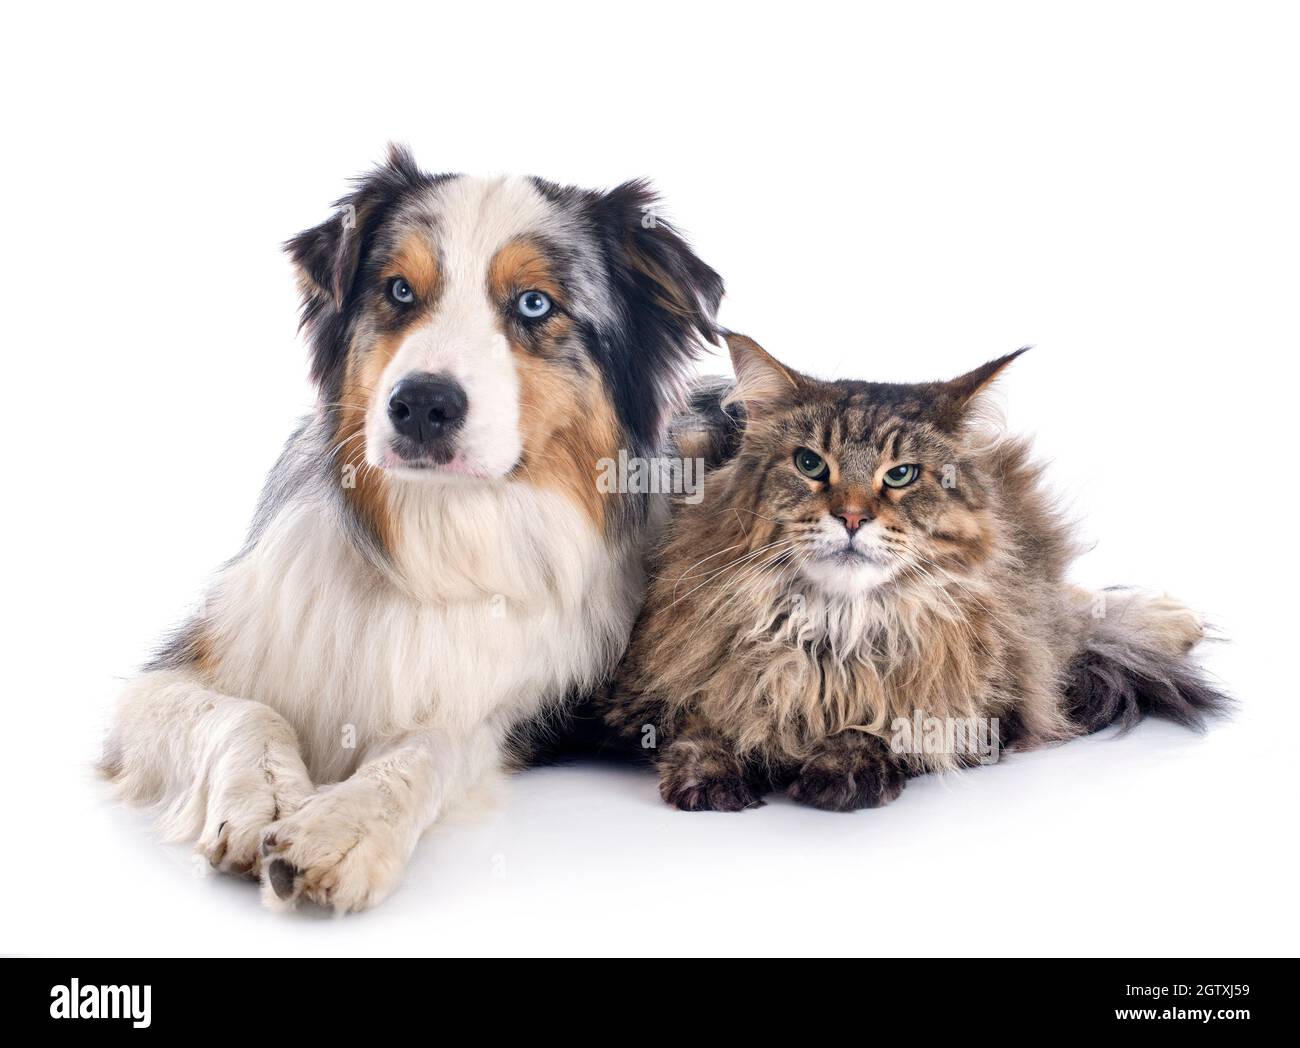 Dog And Cat Relaxing On White Background Stock Photo